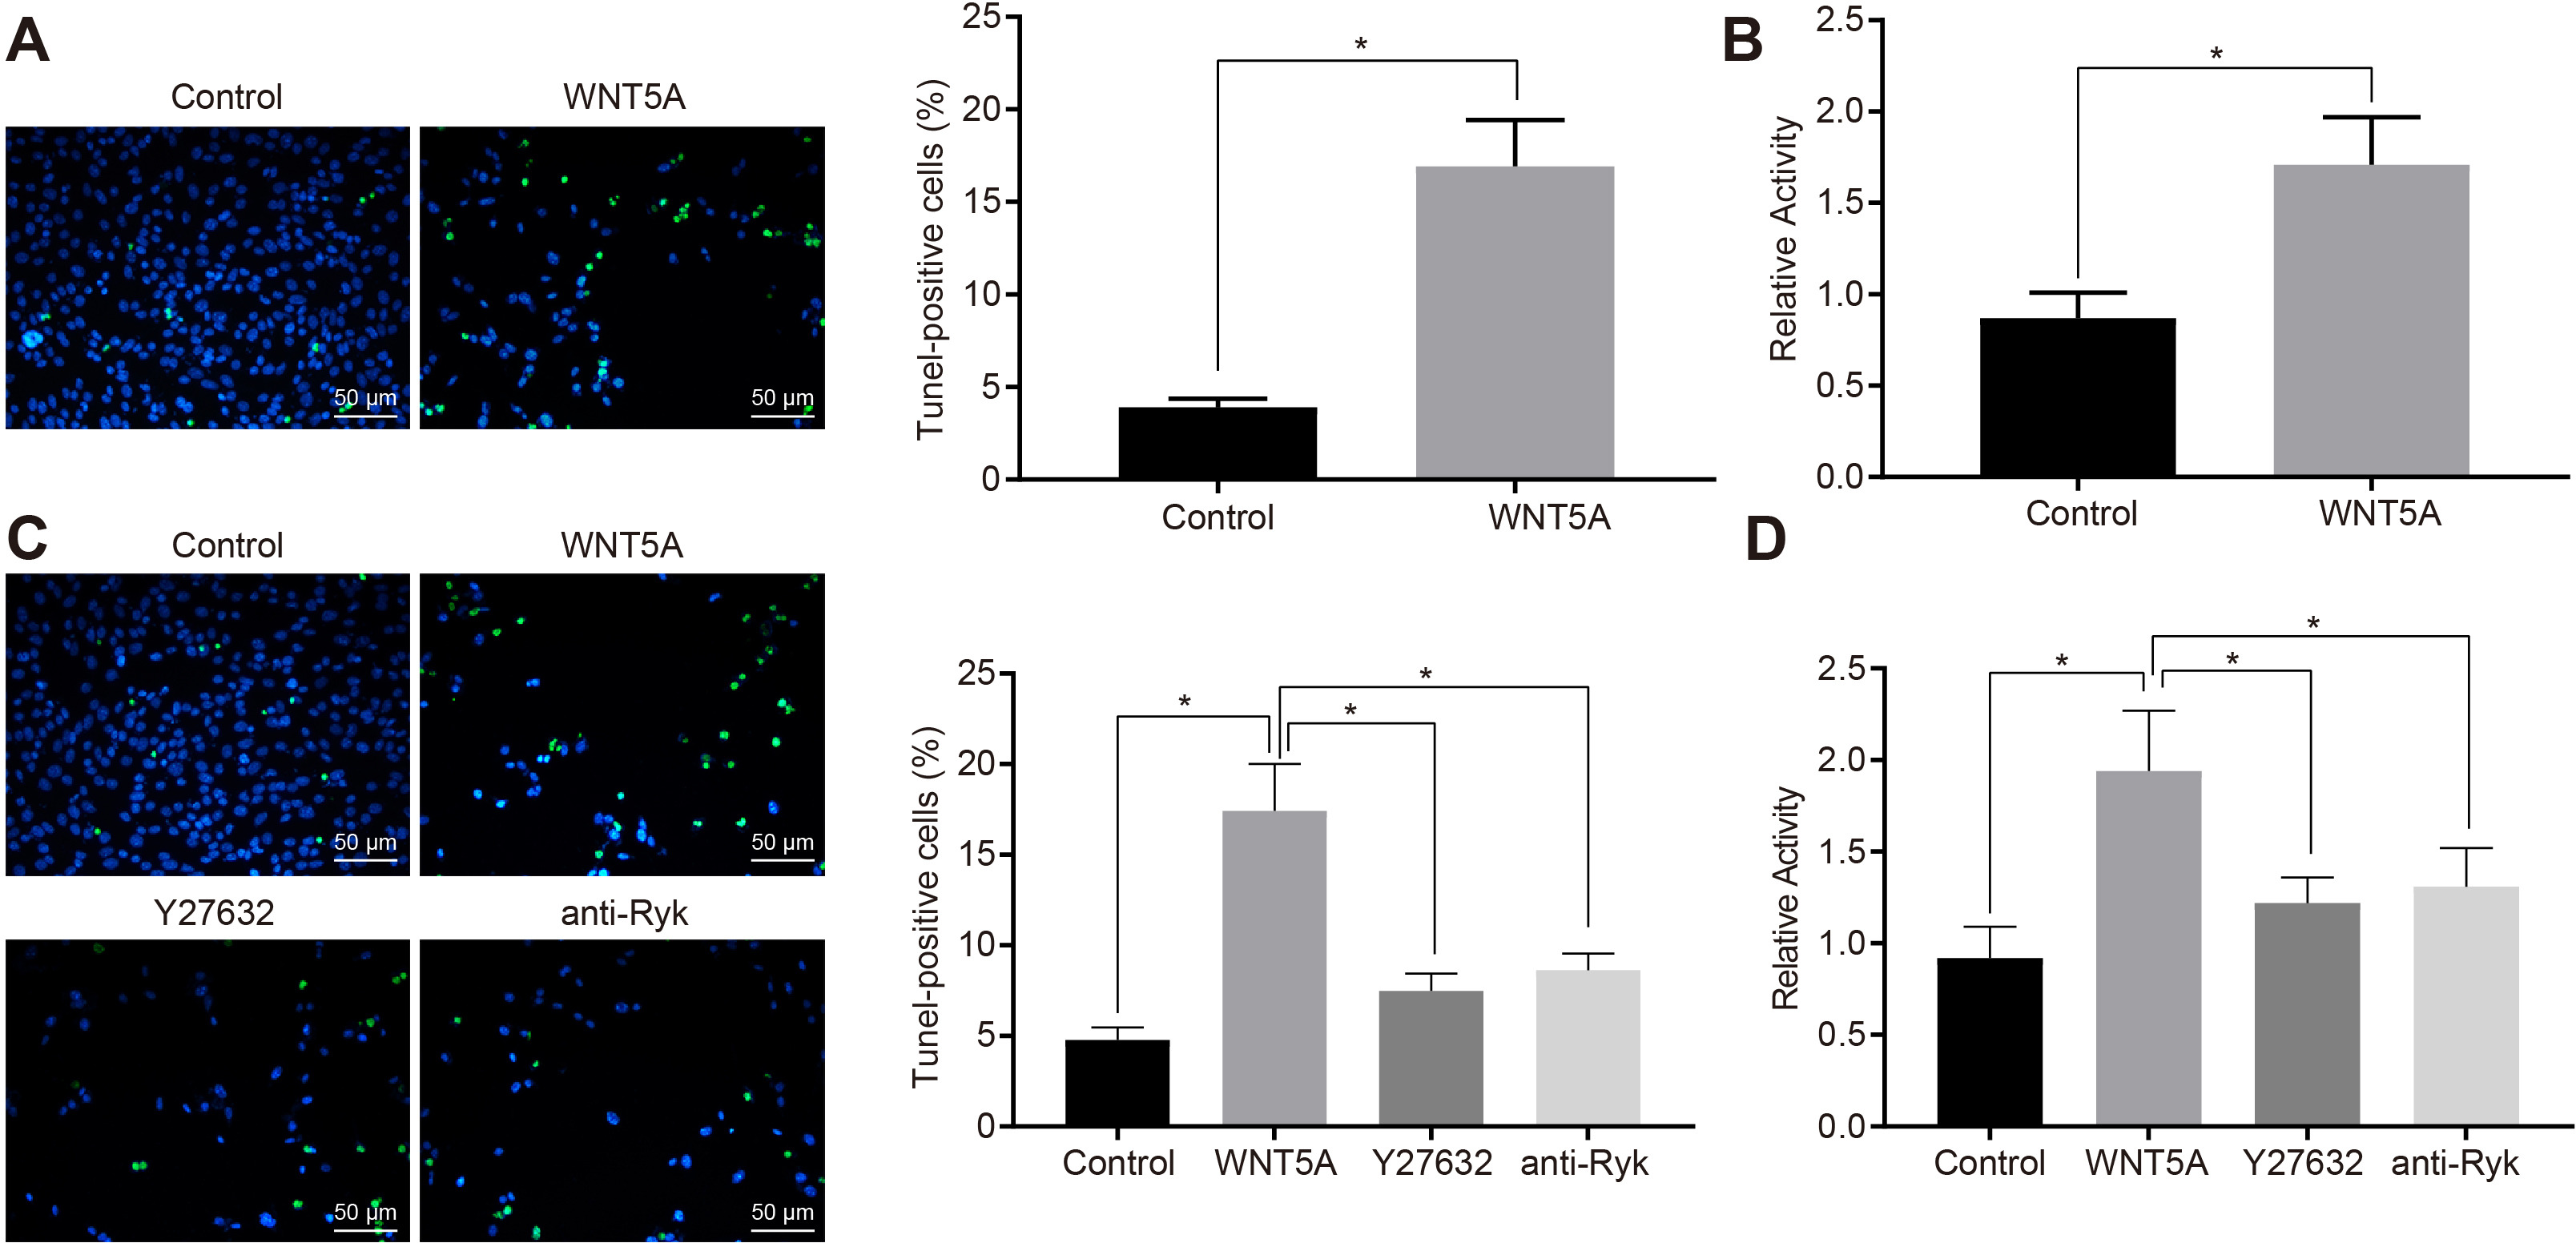 Fig. 4 
            Wnt family member 5A (WNT5A) promoted the apoptosis of neurons in dorsal root ganglia (DRG) cells by activating RhoA/Rho-kinase activity. a) DRG cells were treated with 90 ng/ml or without WNT5A for 24 hours. The apoptosis of DRG cells was detected by terminal deoxynucleotidyl transferase dUTP nick end labeling (TUNEL) assay (magnification 200×). b) DRG cells were treated with or without 90 ng/ml WNT5A for ten minutes and Rho kinase activity was detected by G-LISA Rho activity assay. c) DRG cells without any treatment and DRG cells treated with WNT5A, WNT5A + Y27632 (10 uM; inhibited the activity of Rho-kinase), and WNT5A + anti Ryk antibody (0.5 ug/ml) for 24 hours were tested by TUNEL staining (magnification 200×). d) DRG cells without any treatment and DRG cells treated with WNT5A, WNT5A + Y27632 (10 μM) (inhibited the activity of Rho-kinase), or WNT5A + anti Ryk antibody (0.5 ug/ml) for ten minutes were detected by G-LISA Rho activity assay. *p < 0.05 versus the control. Measurement data were expressed as means and SDs. The independent-samples t-test was used to compare the data between two groups. Data comparison among multiple groups was analyzed by one-way analysis of variance (ANOVA), followed by Tukey’s post hoc test. Results are derived from three separate experiments.
          